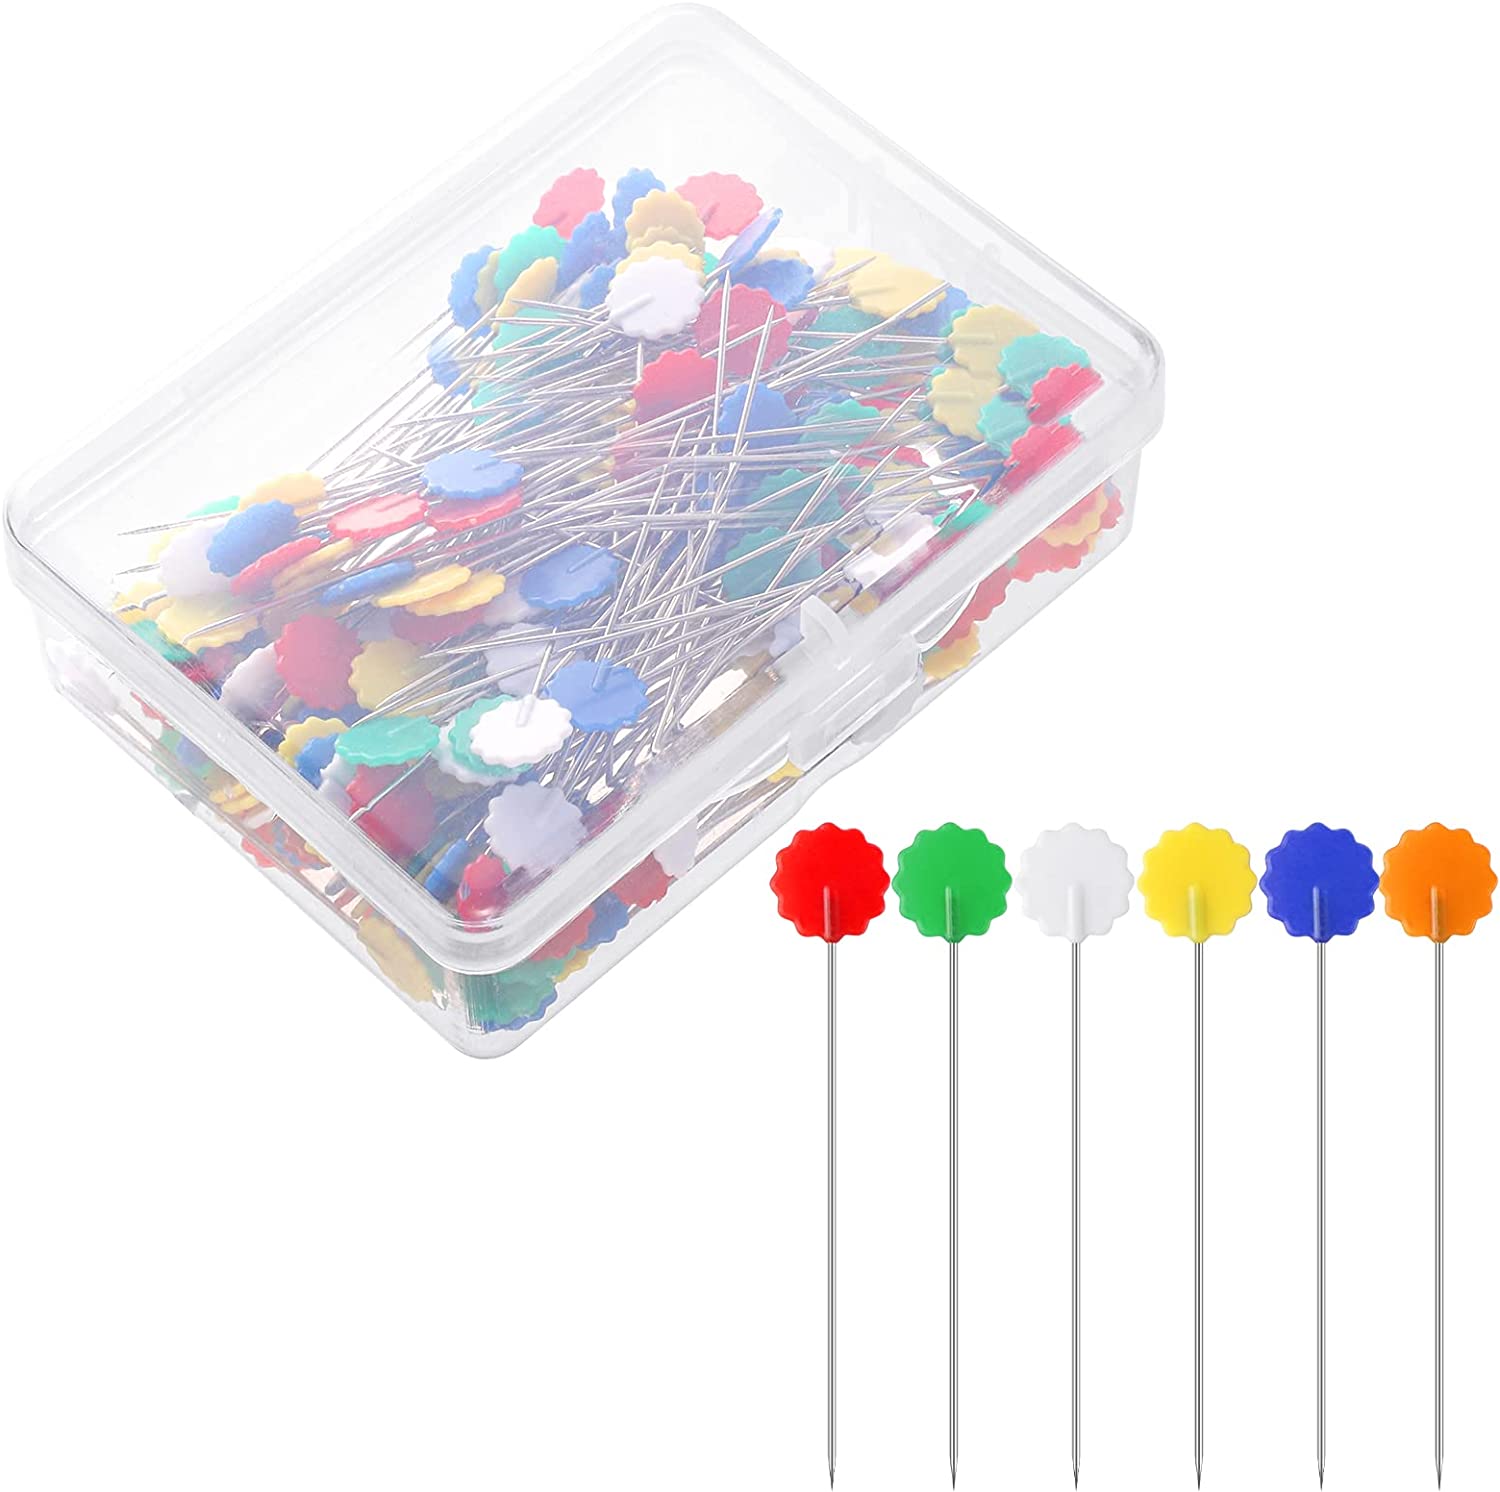 Pengxiaomei Flower-Shaped Crafting Pins For Sewing, 200-Count